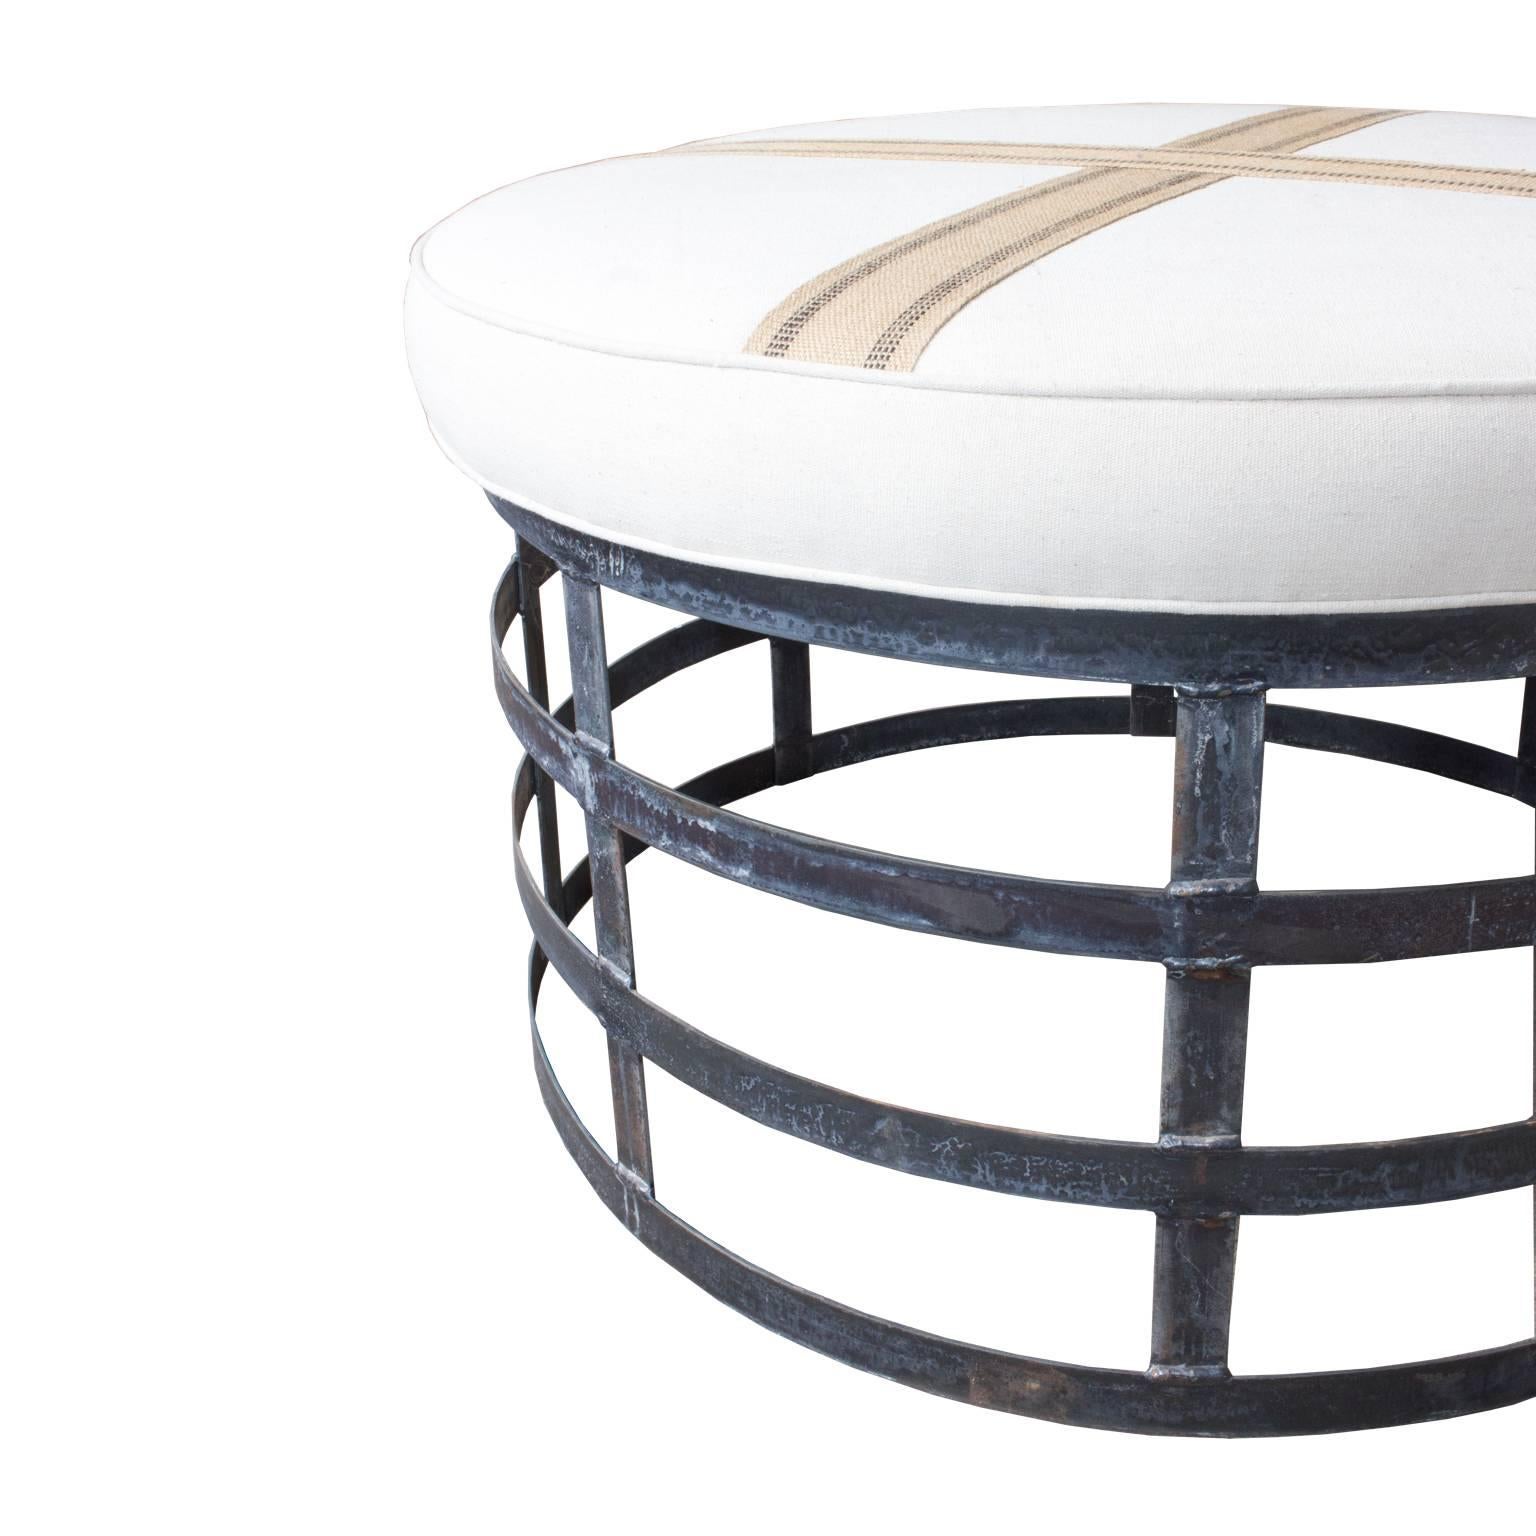 This large, industrial-inspired ottoman was fabricated with an open, steel frame. The top of the ottoman is upholstered in cotton linen and accented with gorgeous burlap ribbon in a cross pattern. This ottoman is just above coffee-table height, so